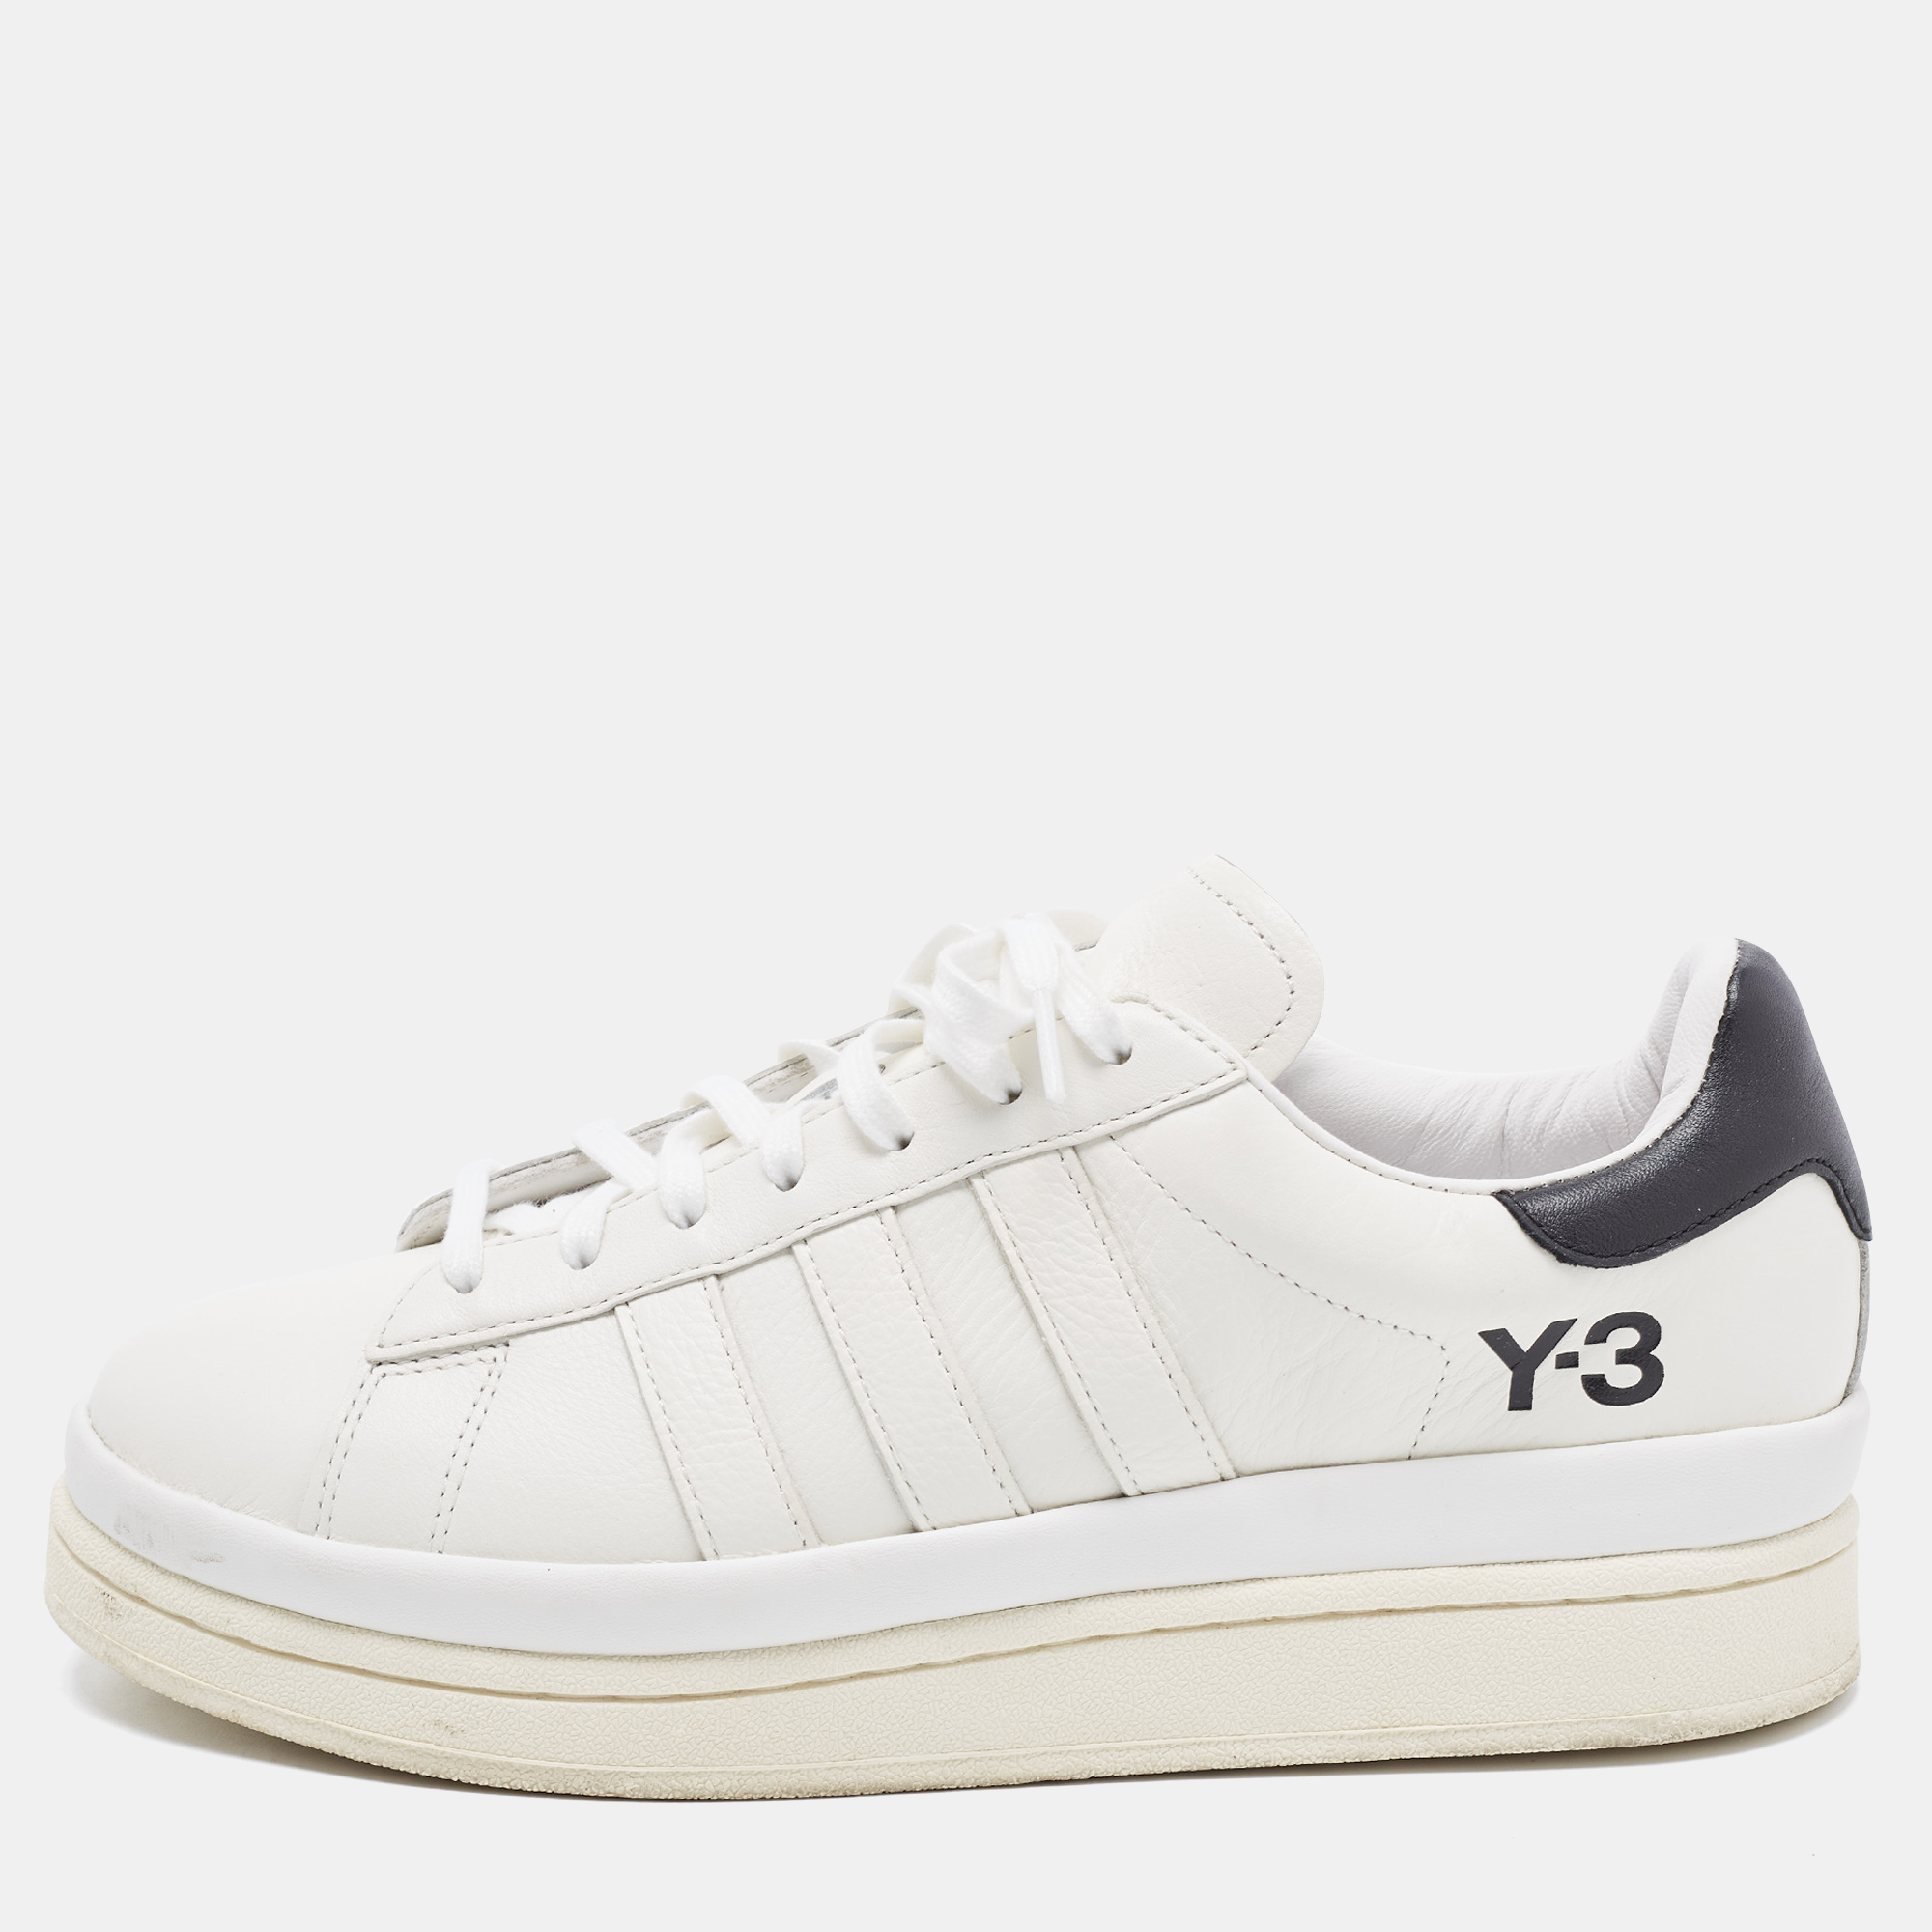 Y 3 brings you these super stylish sneakers to elevate your appearance They are crafted using black white leather into a sturdy low top silhouette. They exhibit lace up fastenings on top and brand detail on their sides.